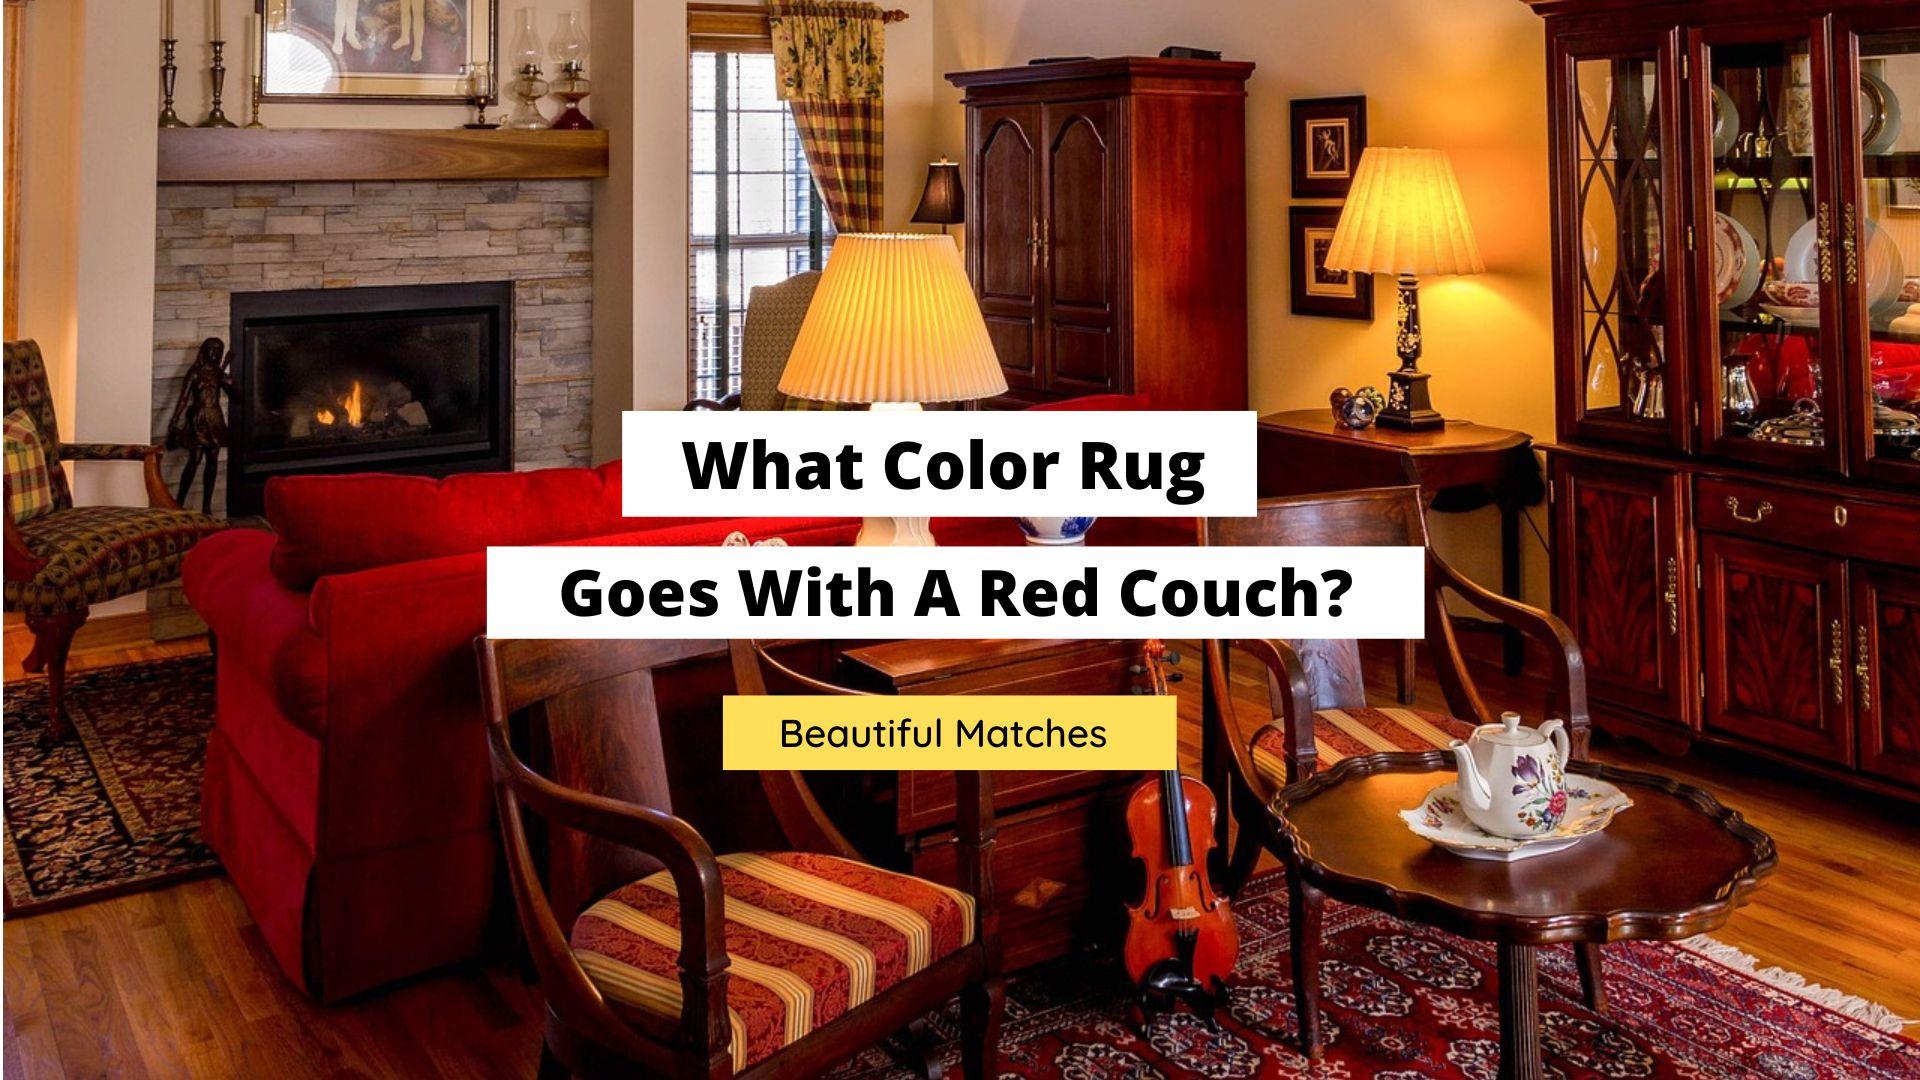 What Color Rug Goes With A Red Couch